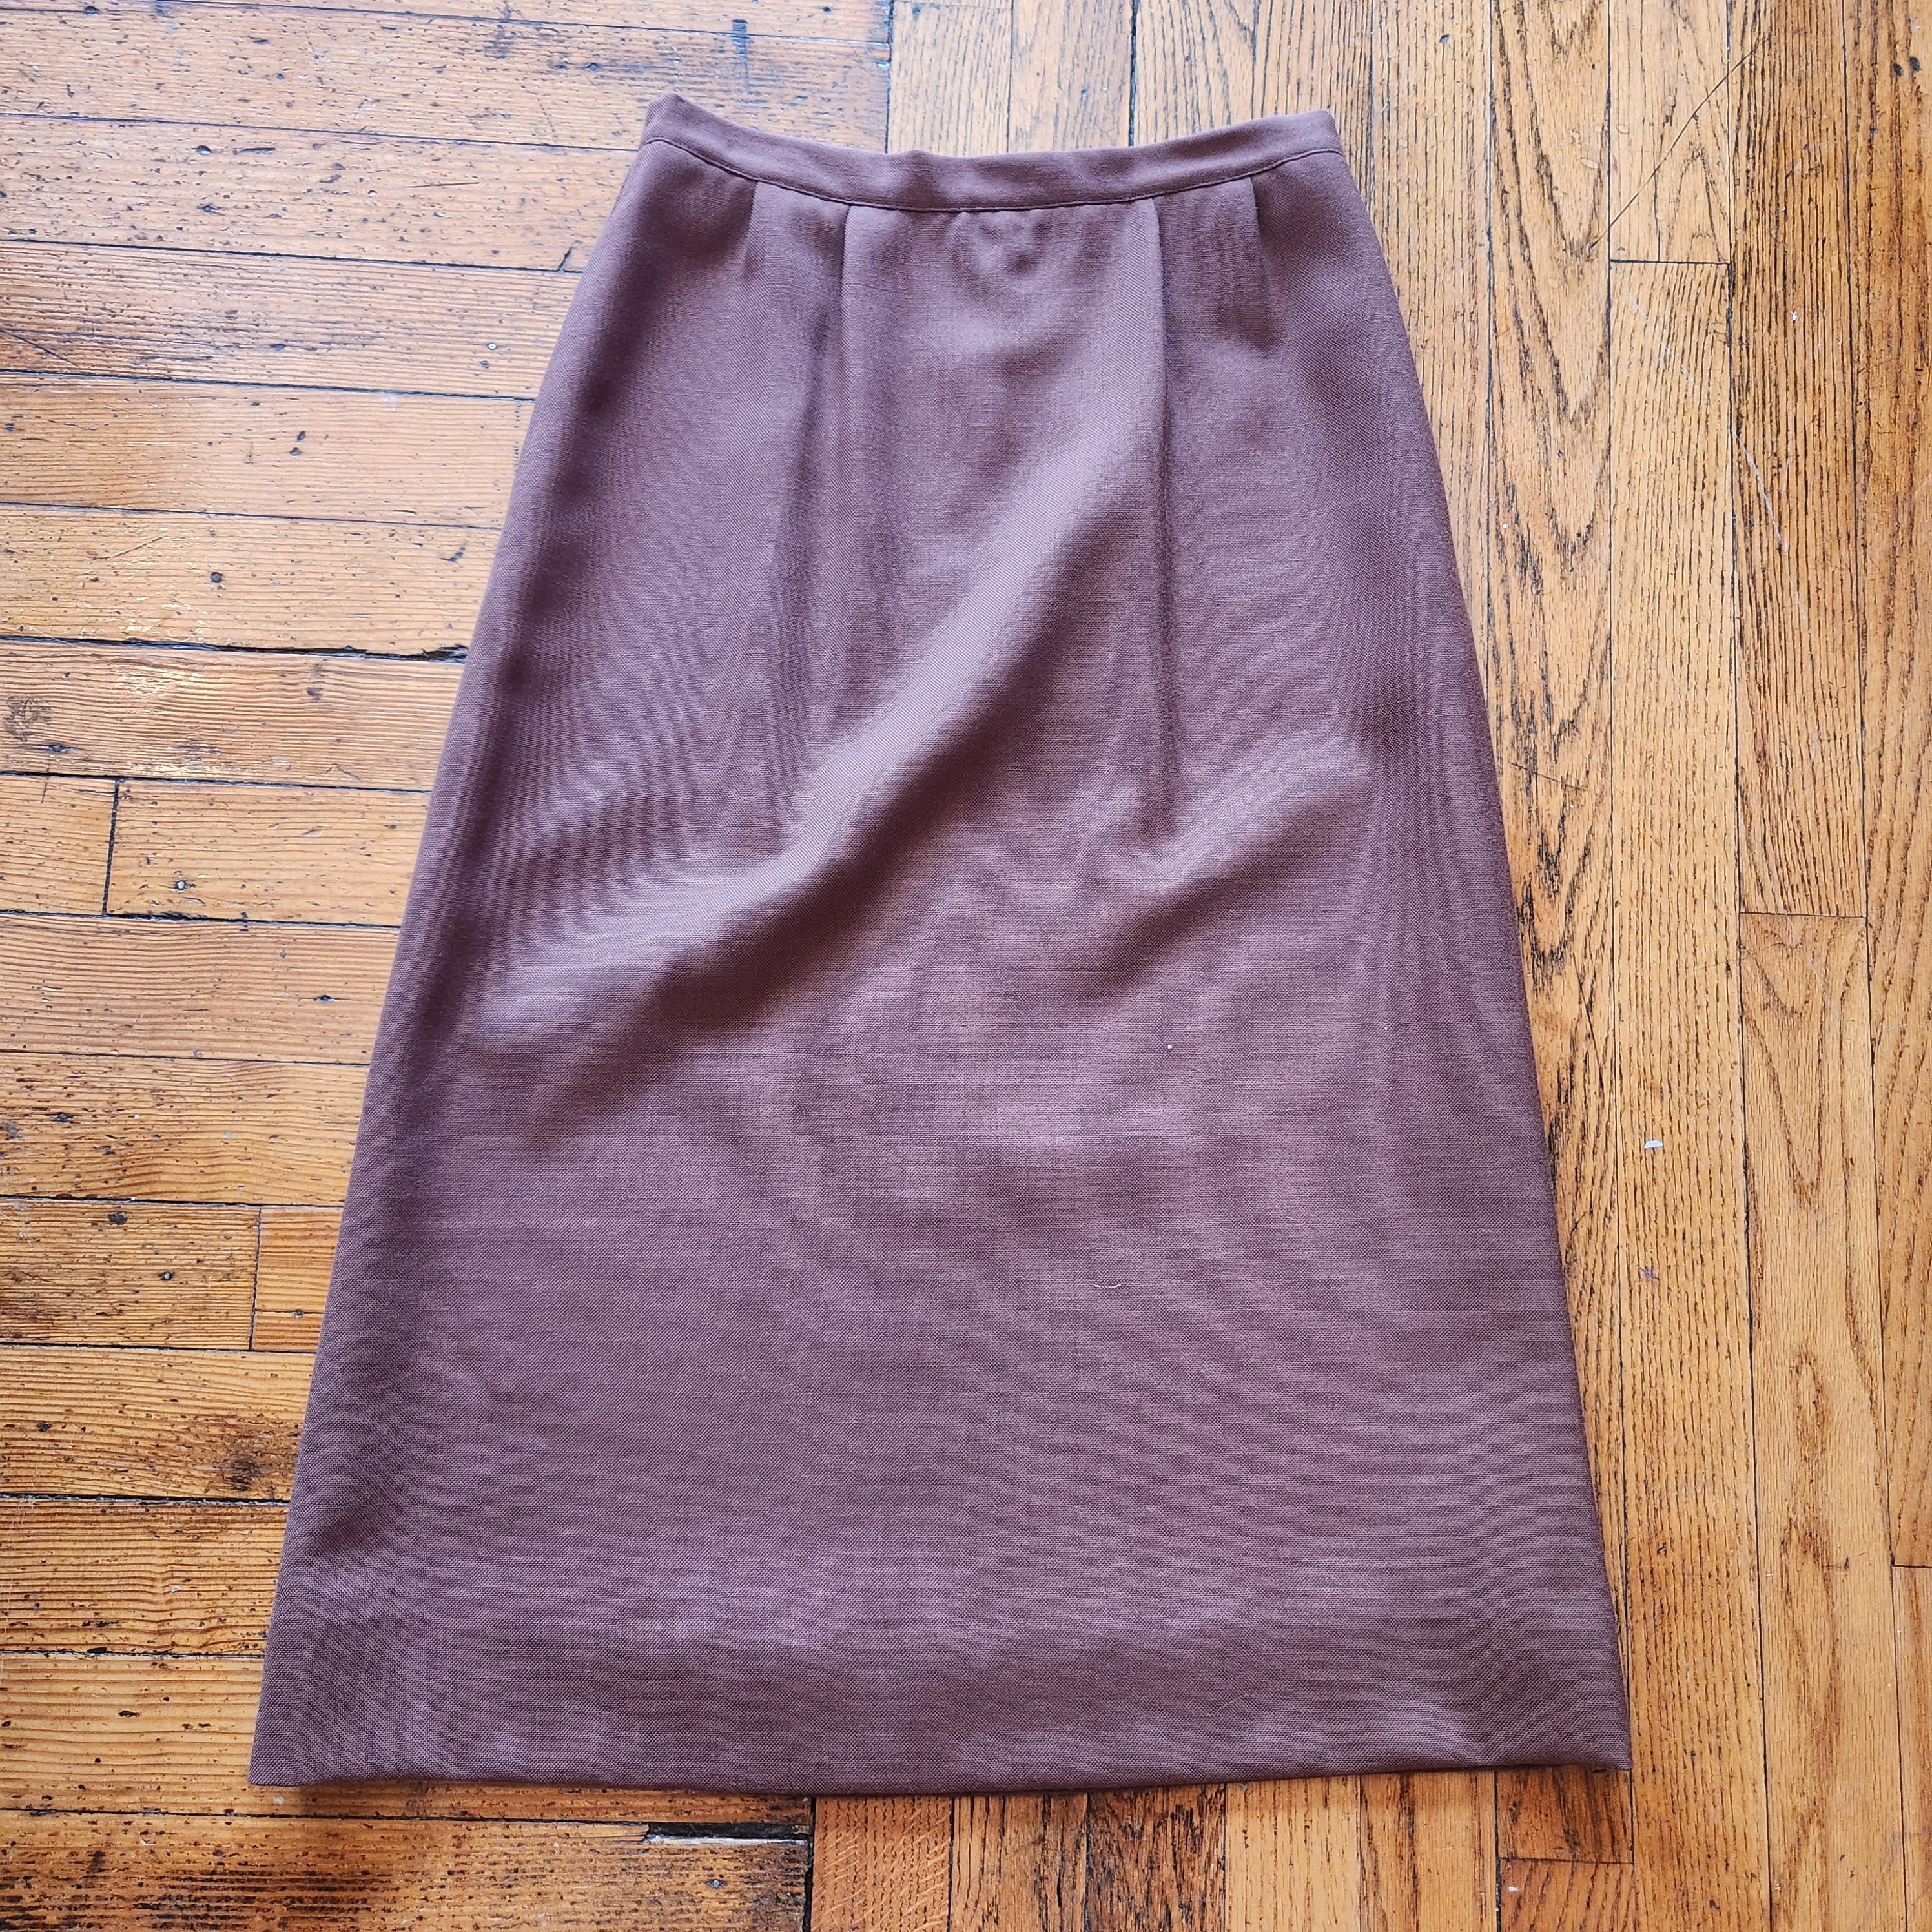 Vintage Woven A-Line Skirt